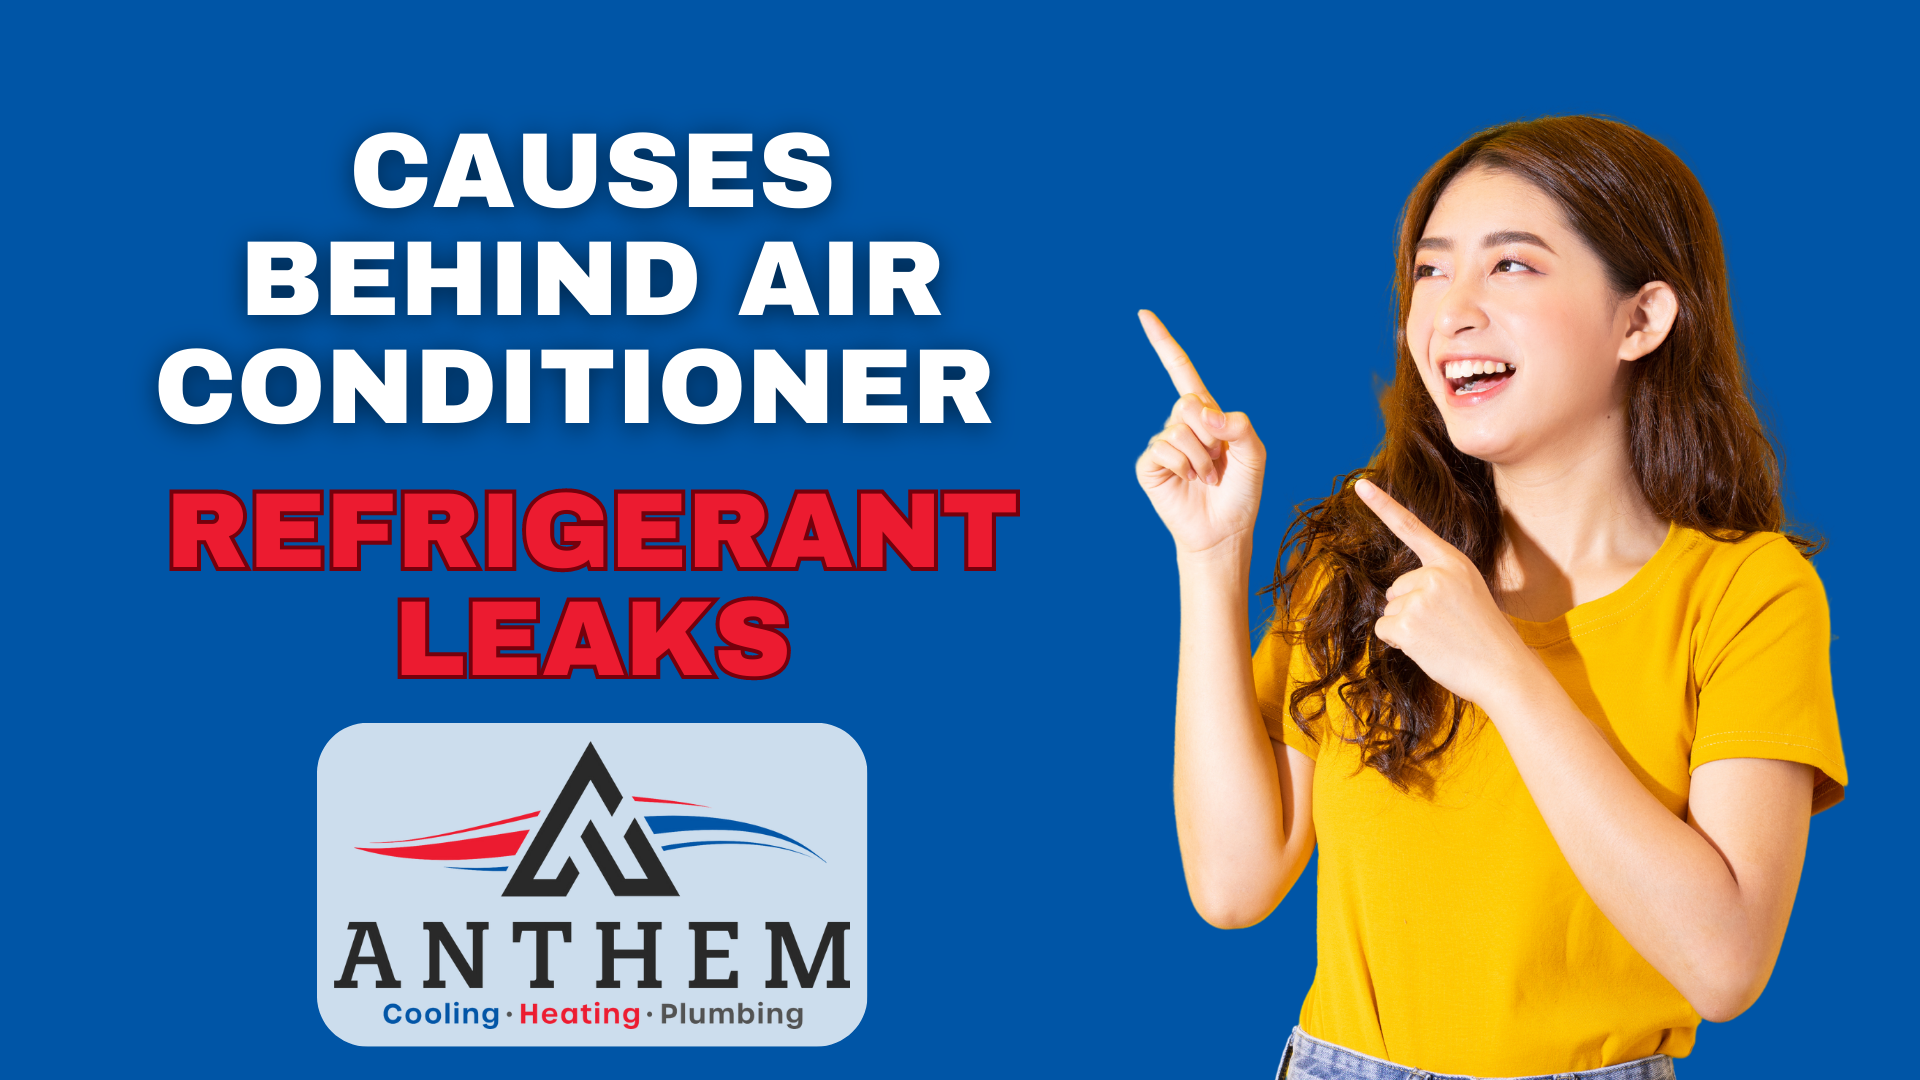 Identifying Causes Behind Air Conditioner Refrigerant Leaks